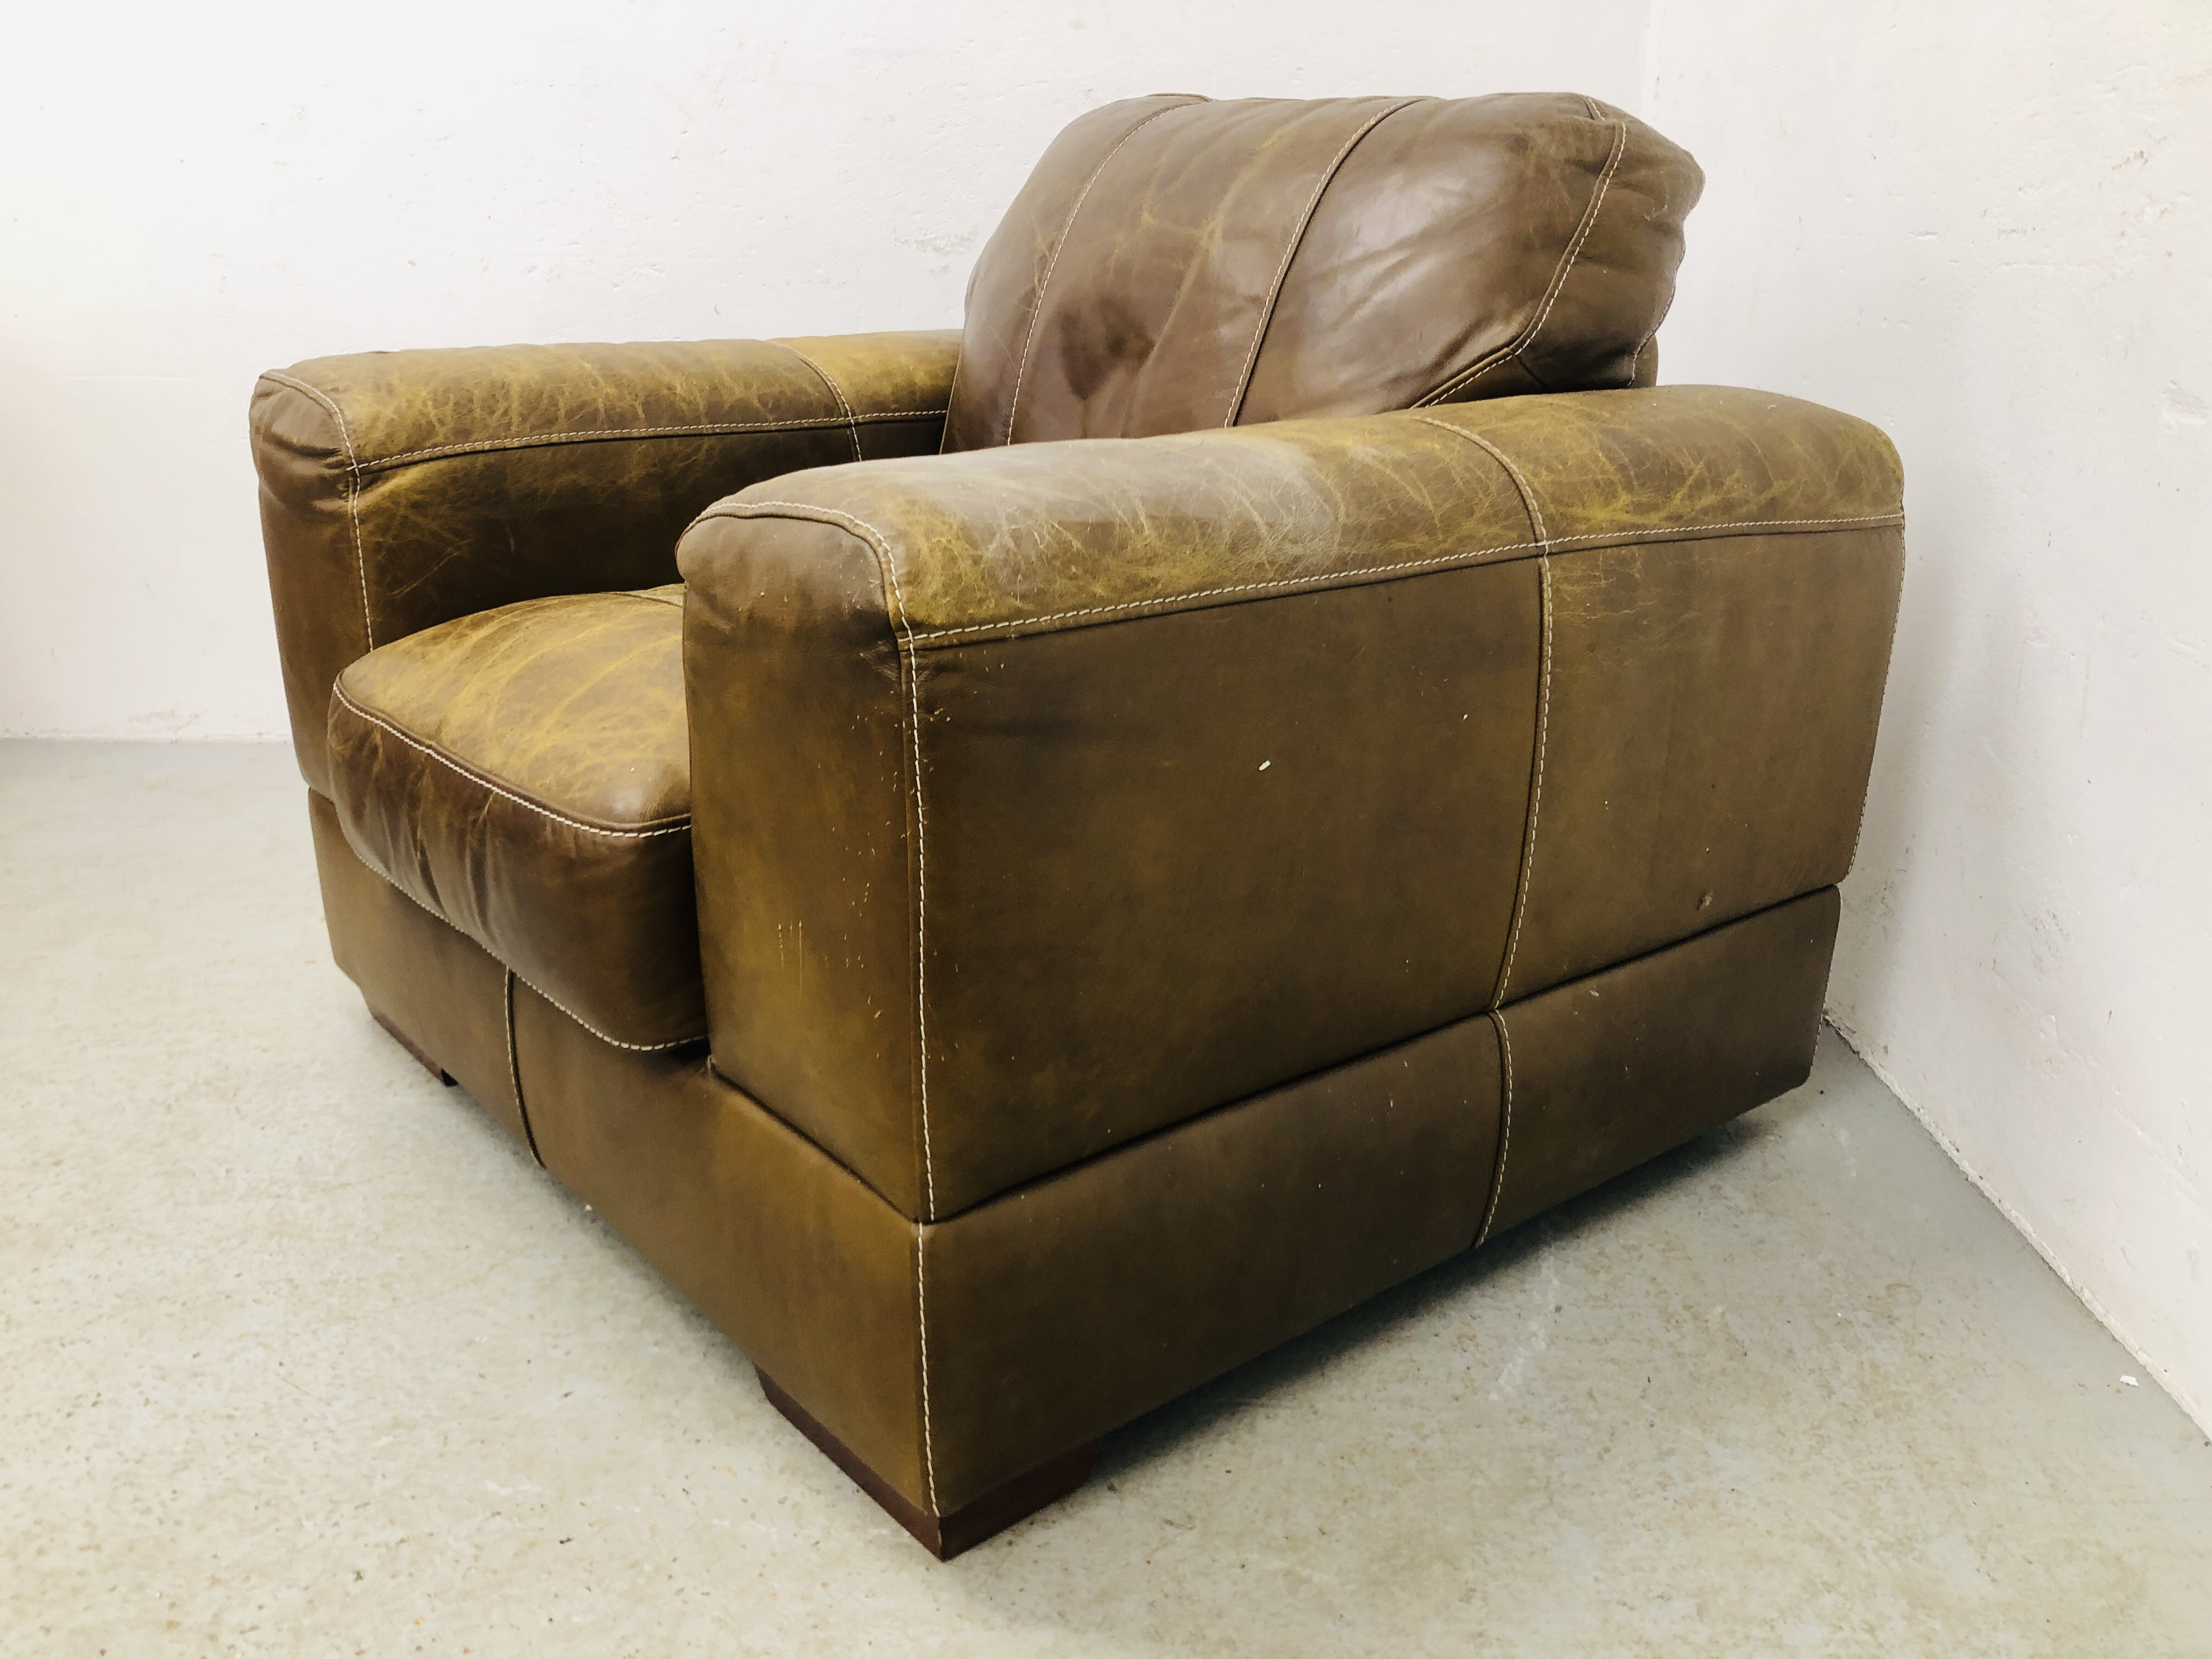 MODERN BROWN LEATHER ARMCHAIR - Image 4 of 5